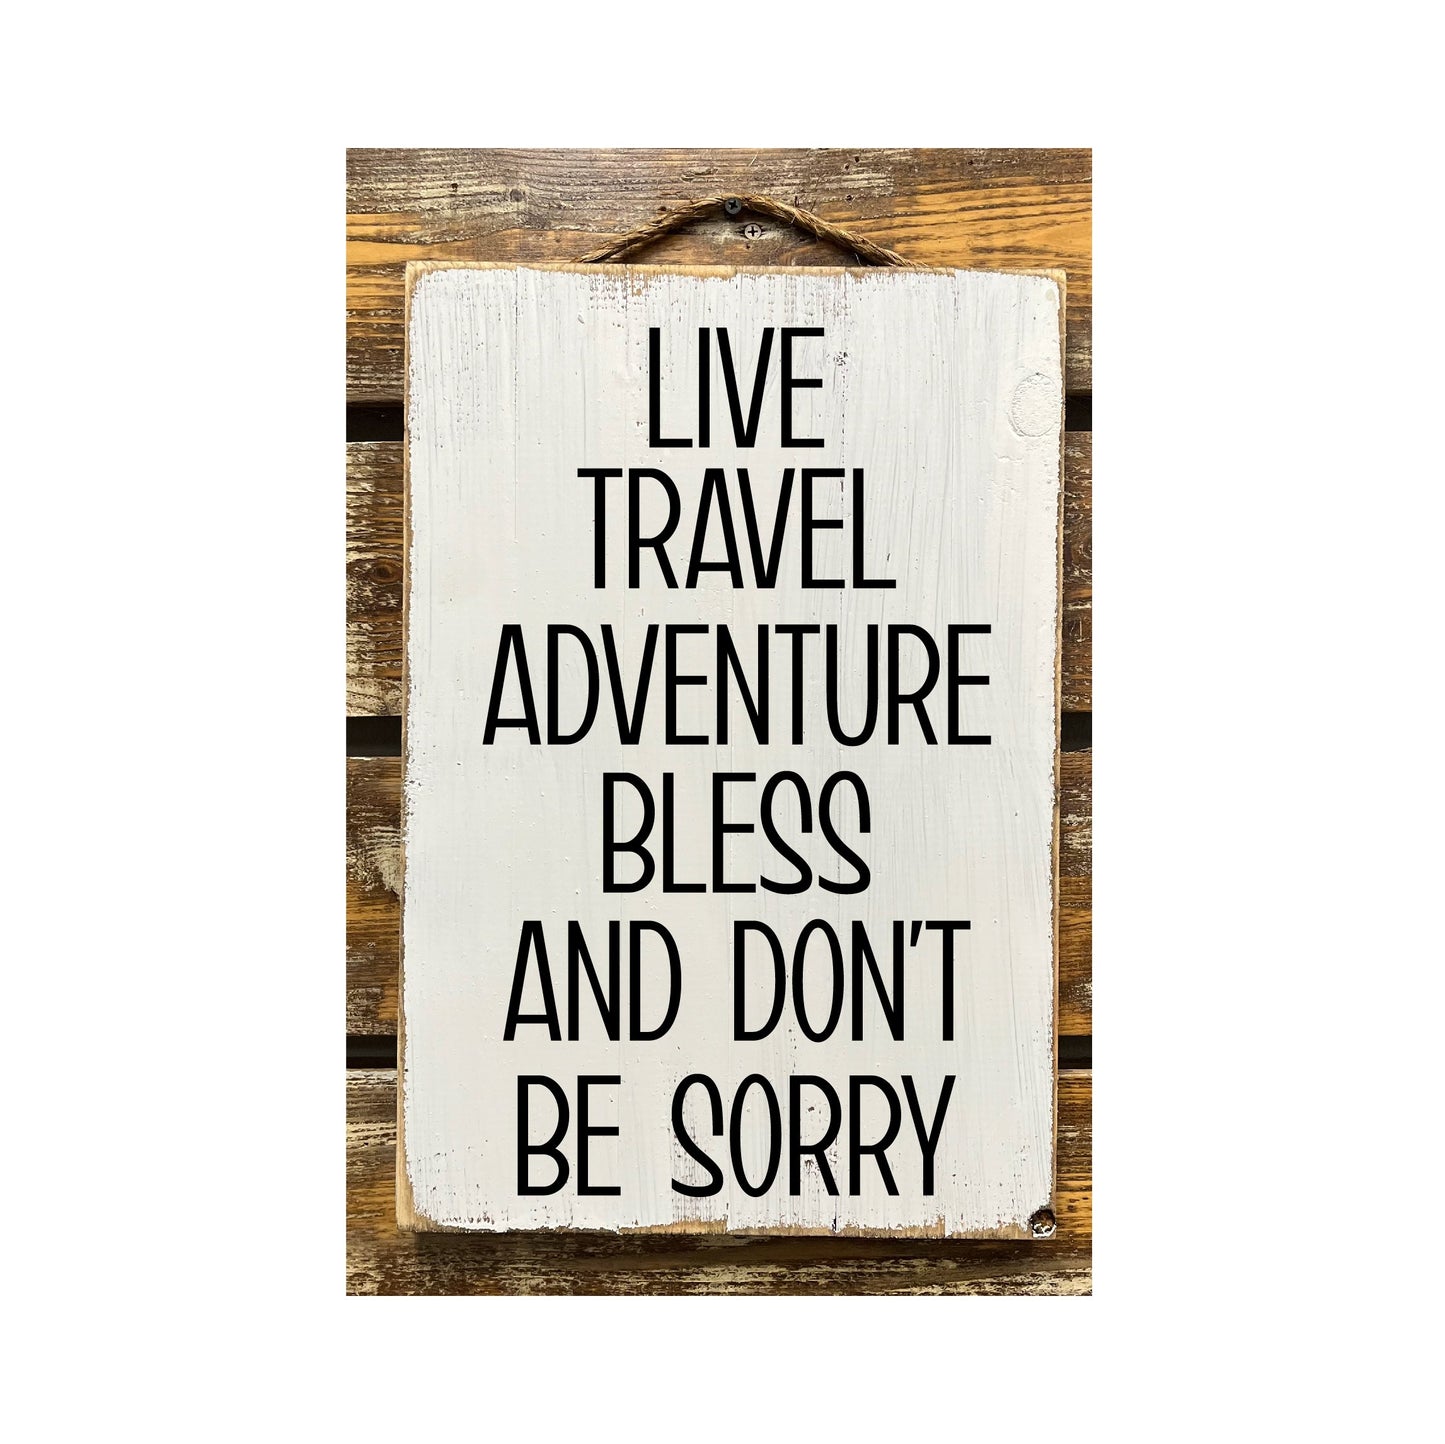 Live Travel Adventure Bless And Don't Be Sorry